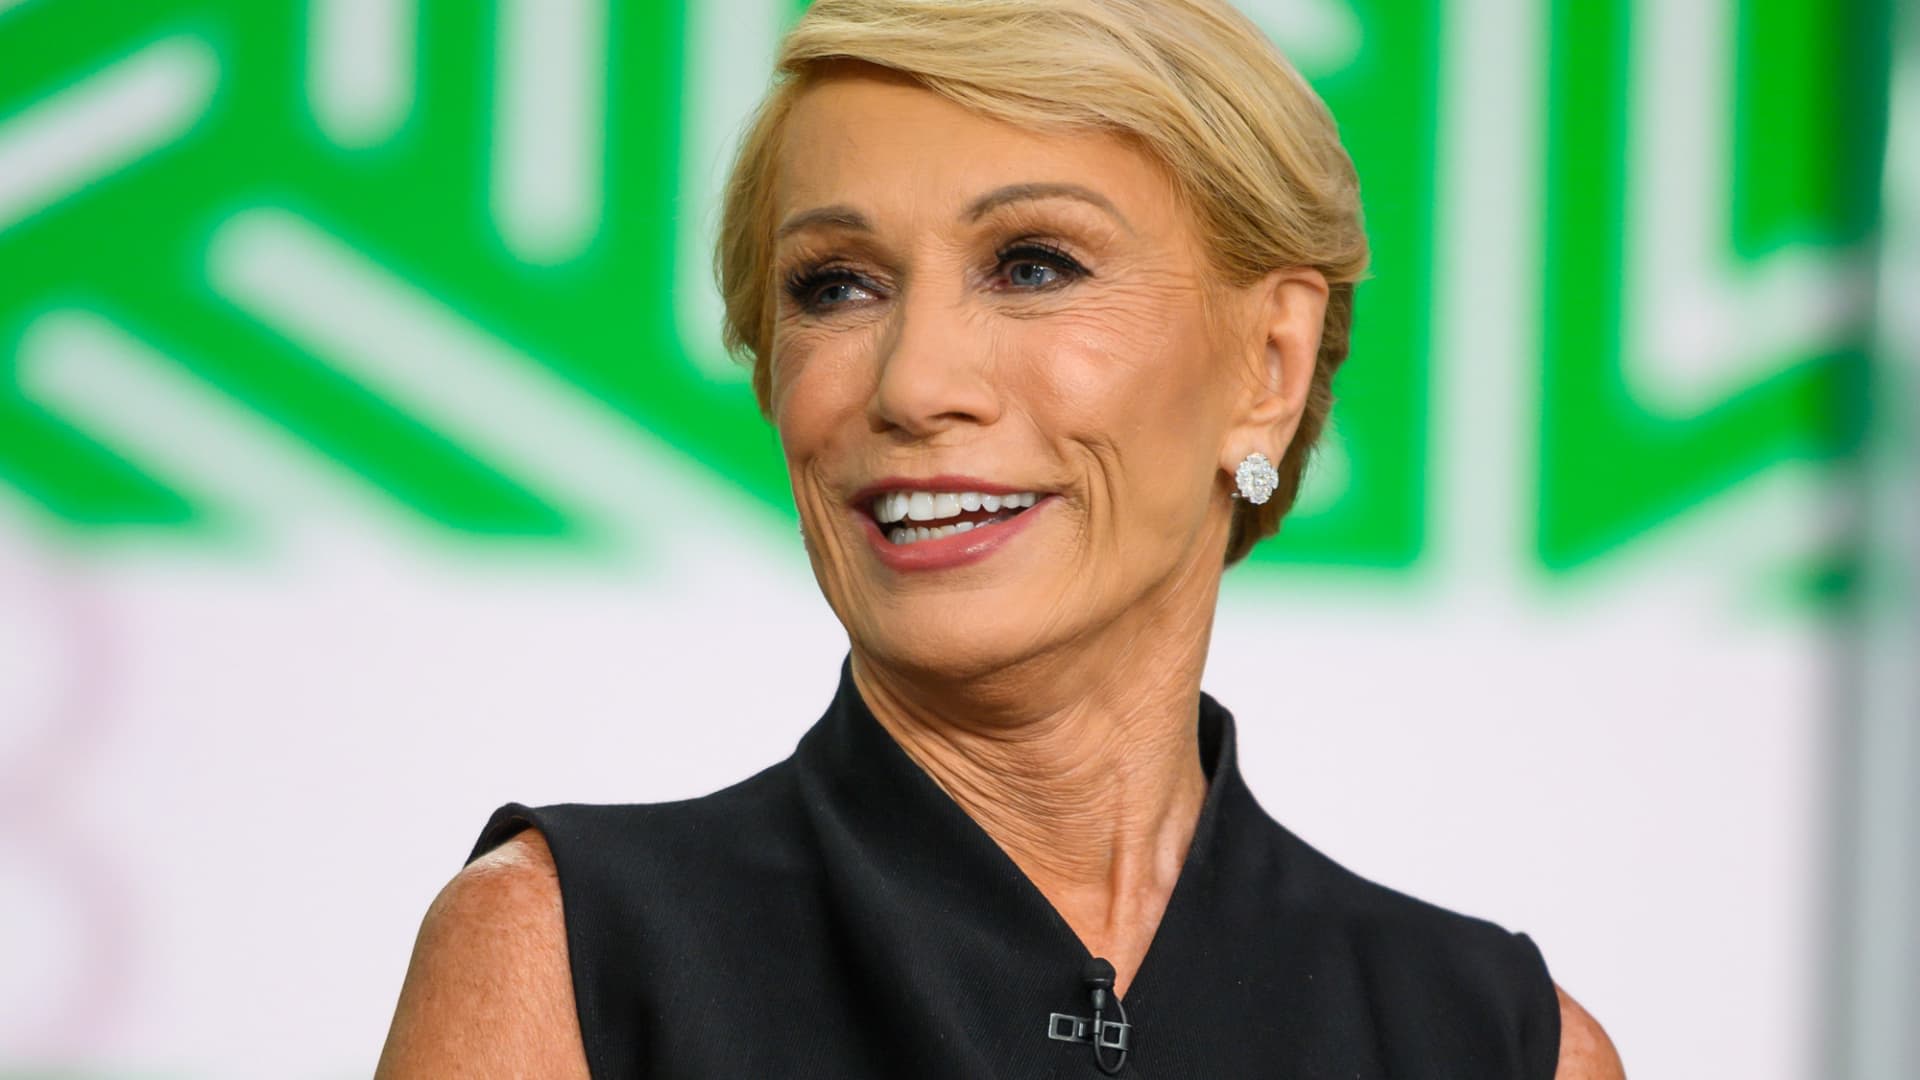 'Forget about Florida' and 6 other key pieces of real estate advice from Barbara Corcoran